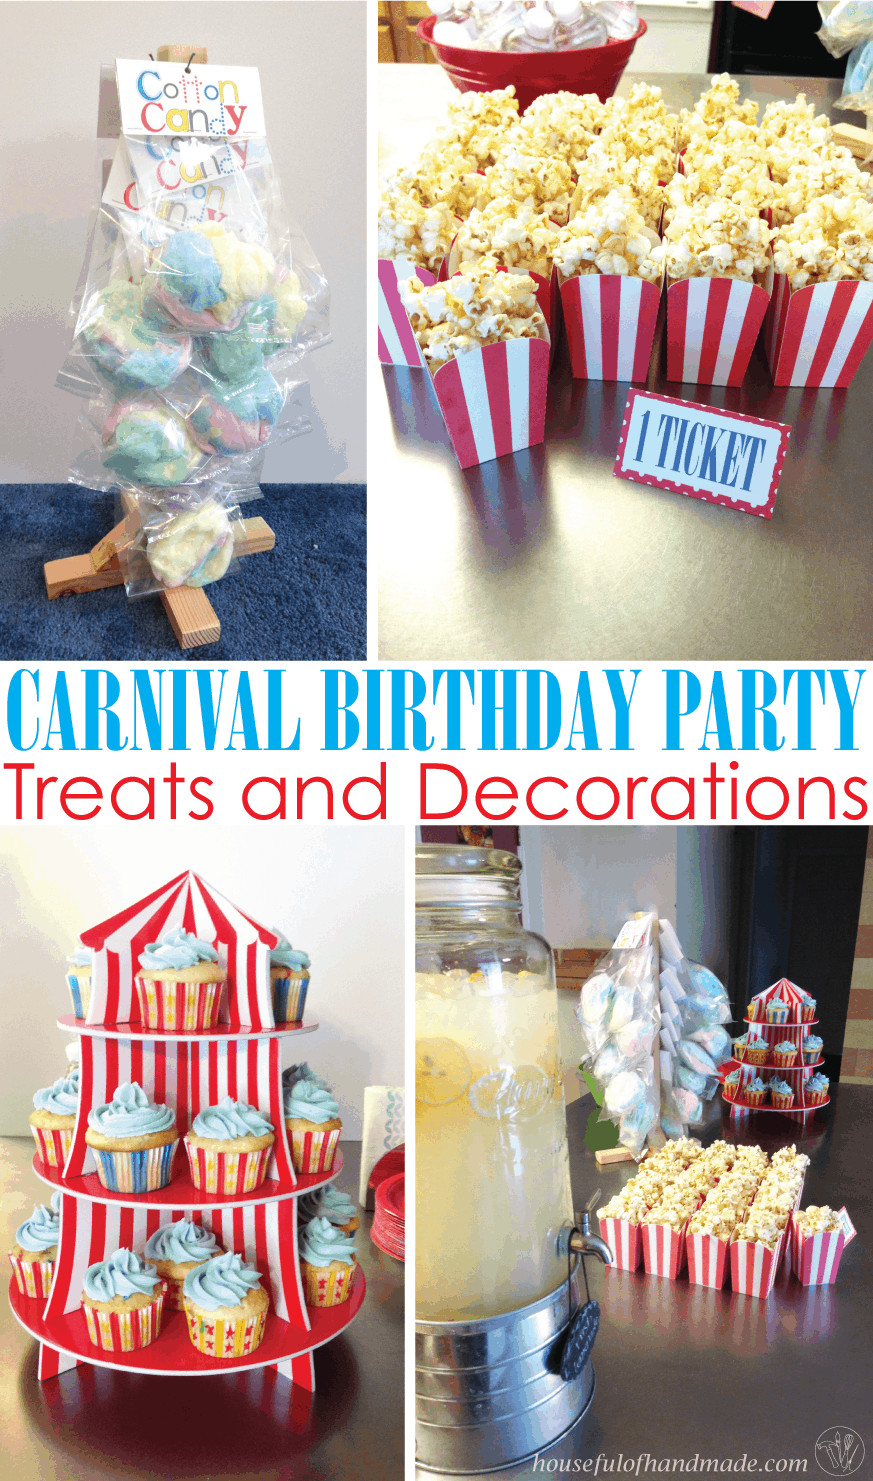 Carnival Birthday Party Decorations
 Carnival Birthday Party Part 2 Treats & Decorations